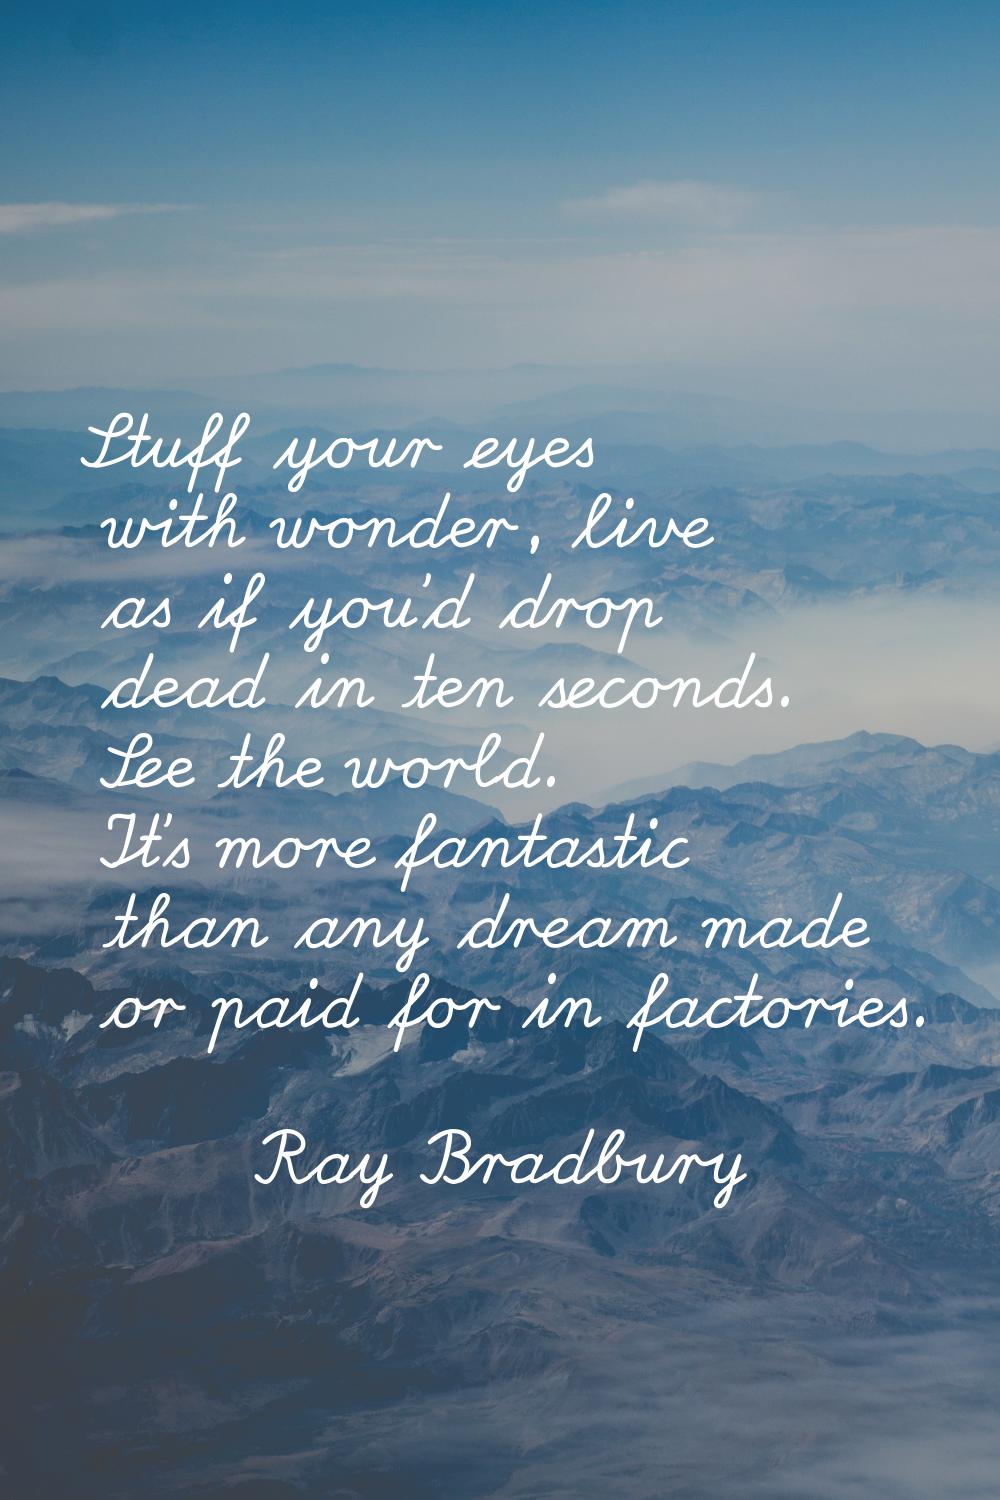 Stuff your eyes with wonder, live as if you'd drop dead in ten seconds. See the world. It's more fa